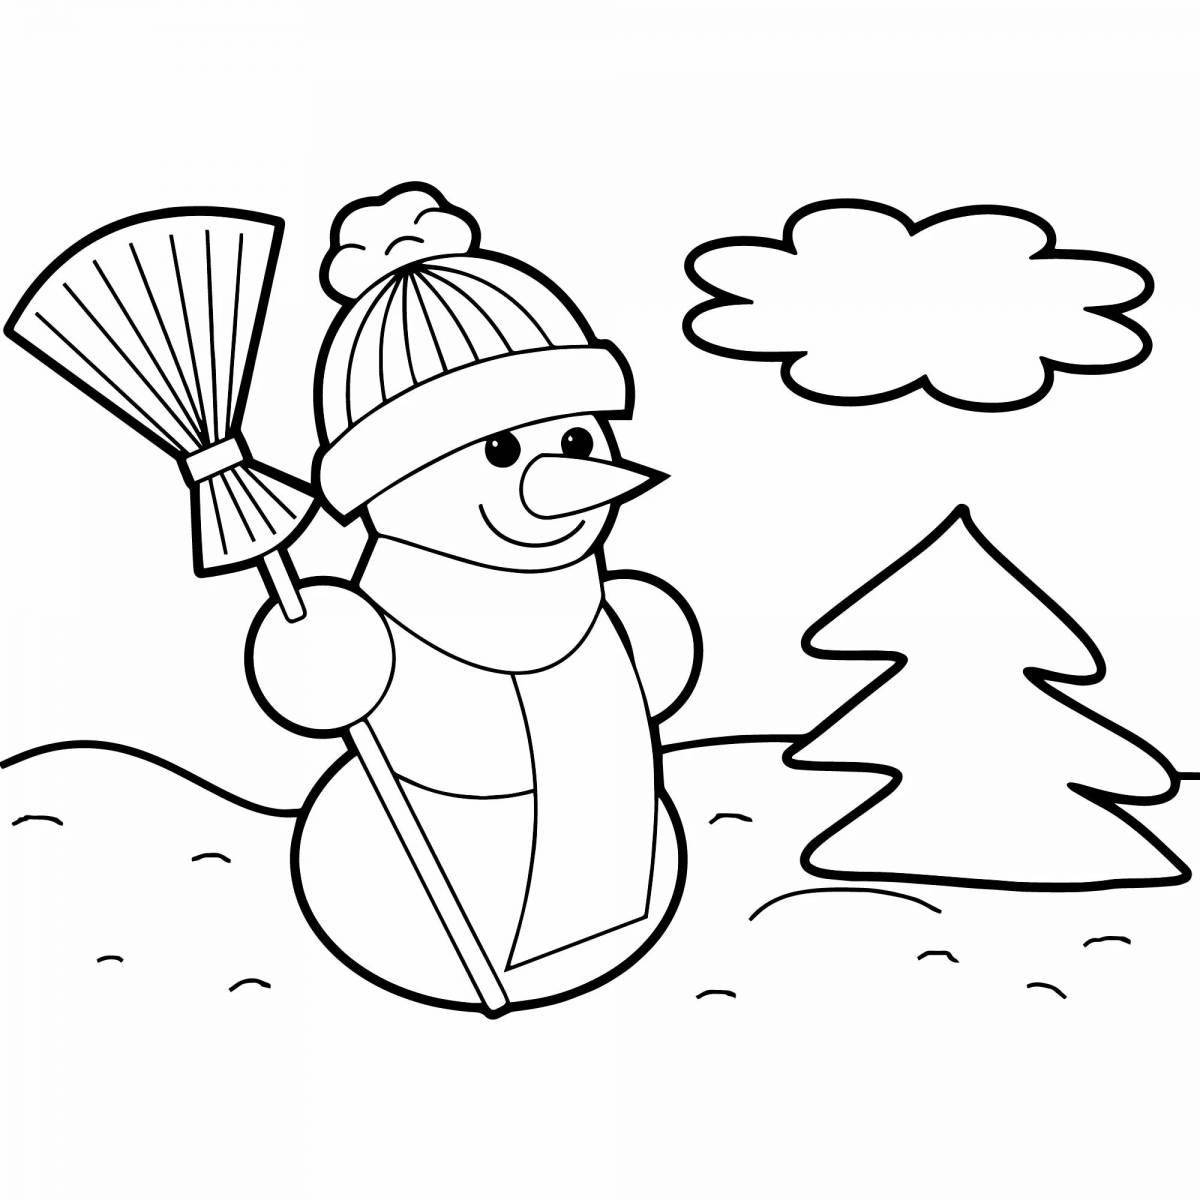 Fantastic 5 Years of Winter coloring page